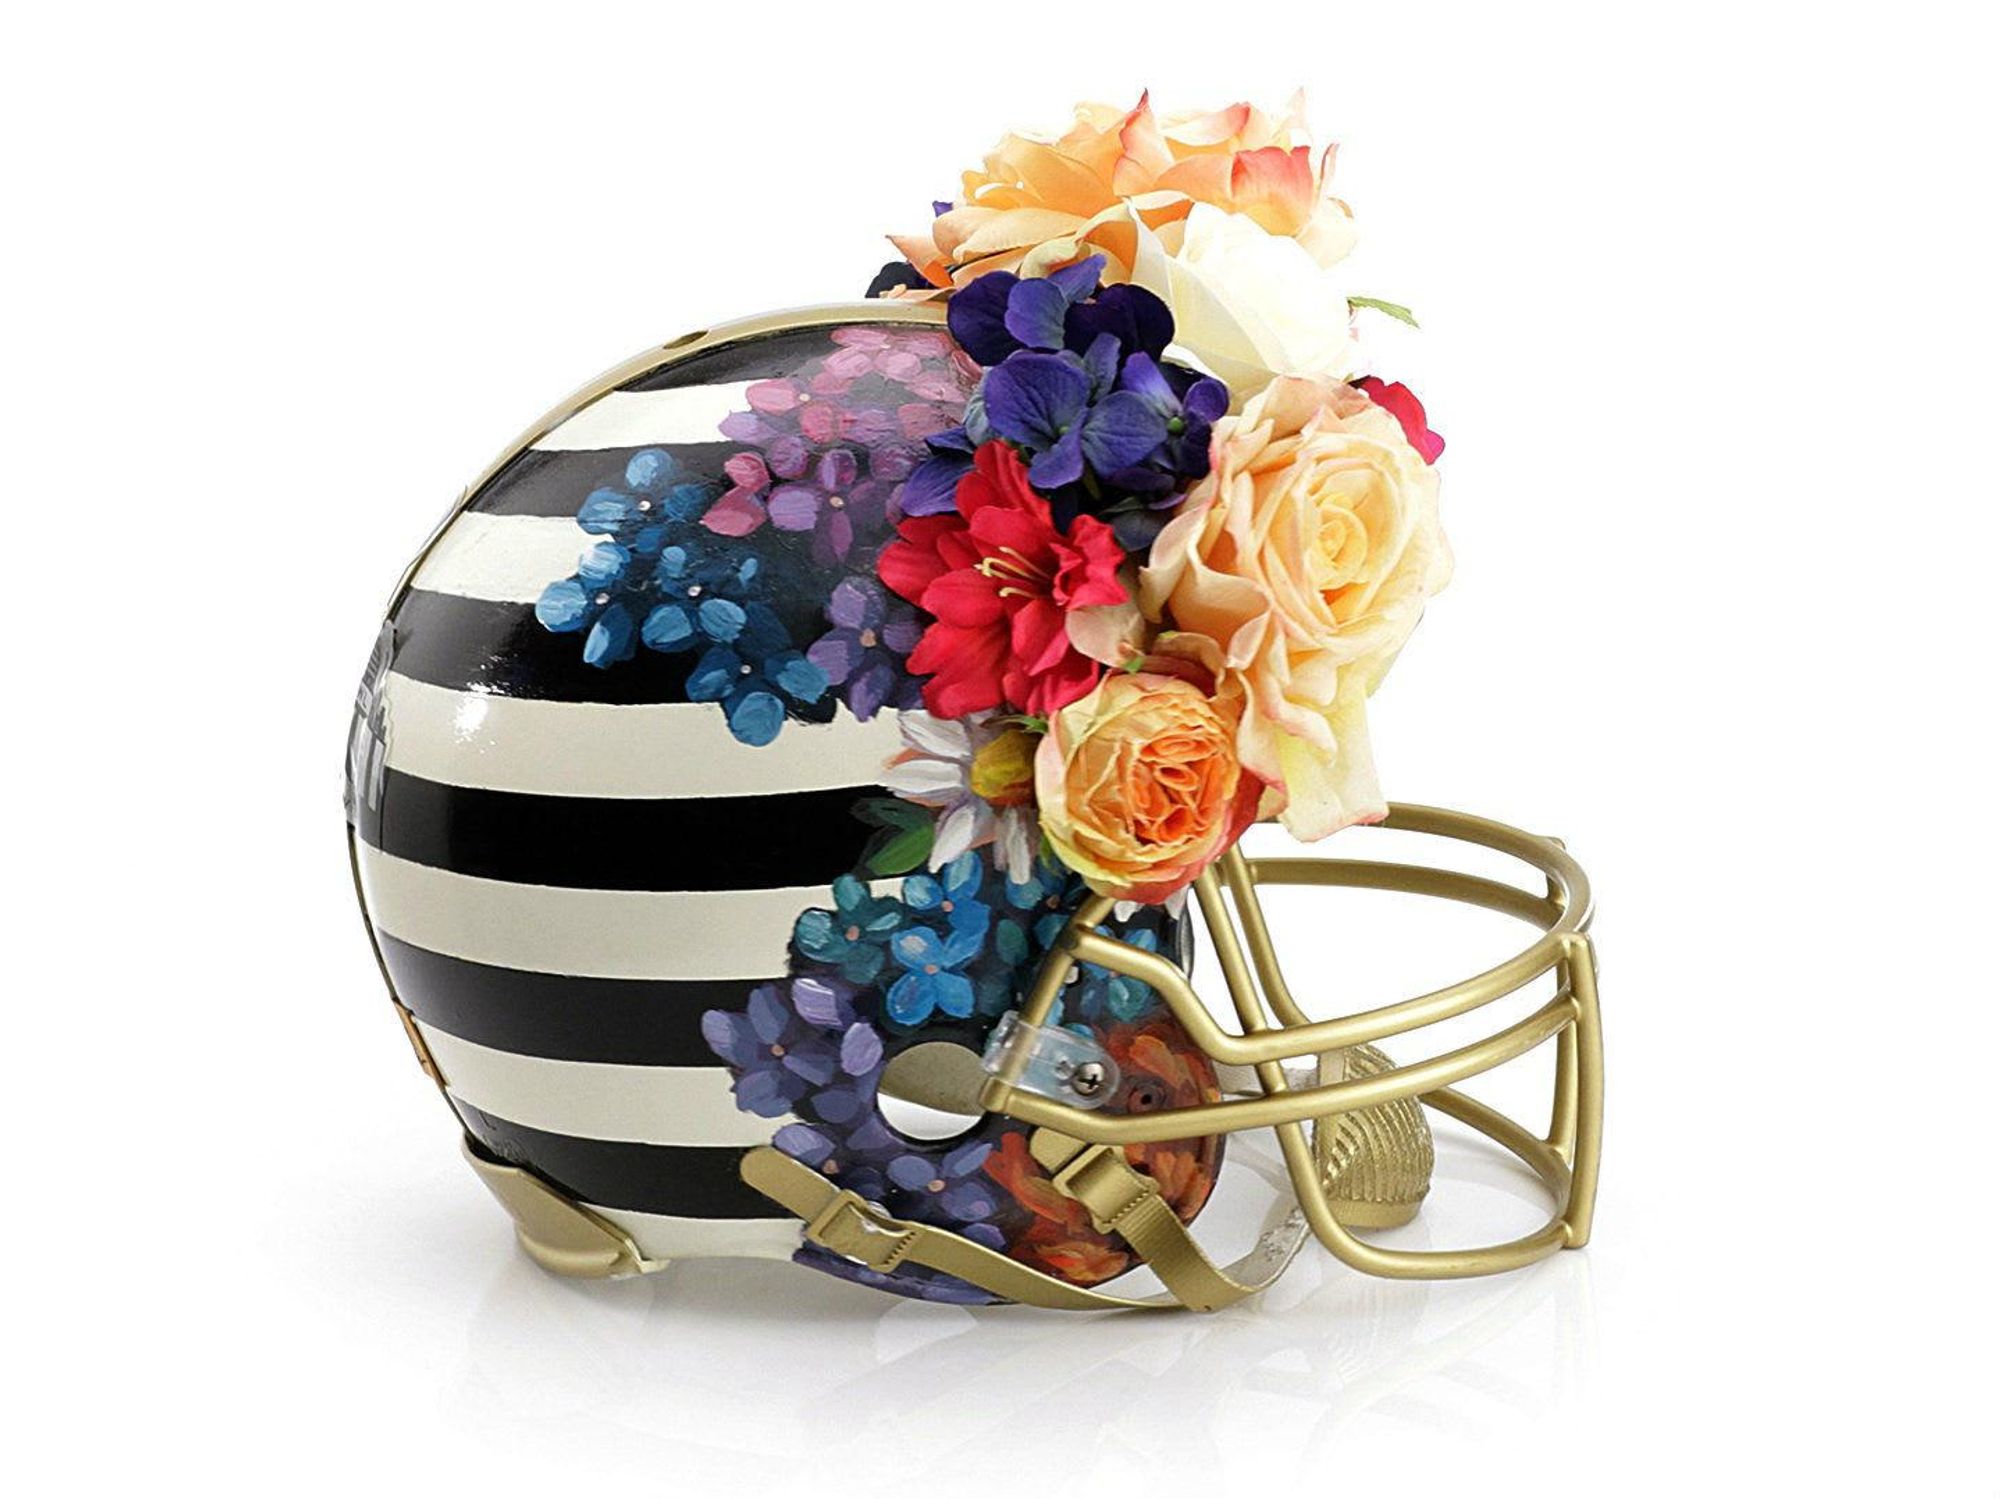 Nicole Miller helmet for Bloomingdale's Fashion Touchdown